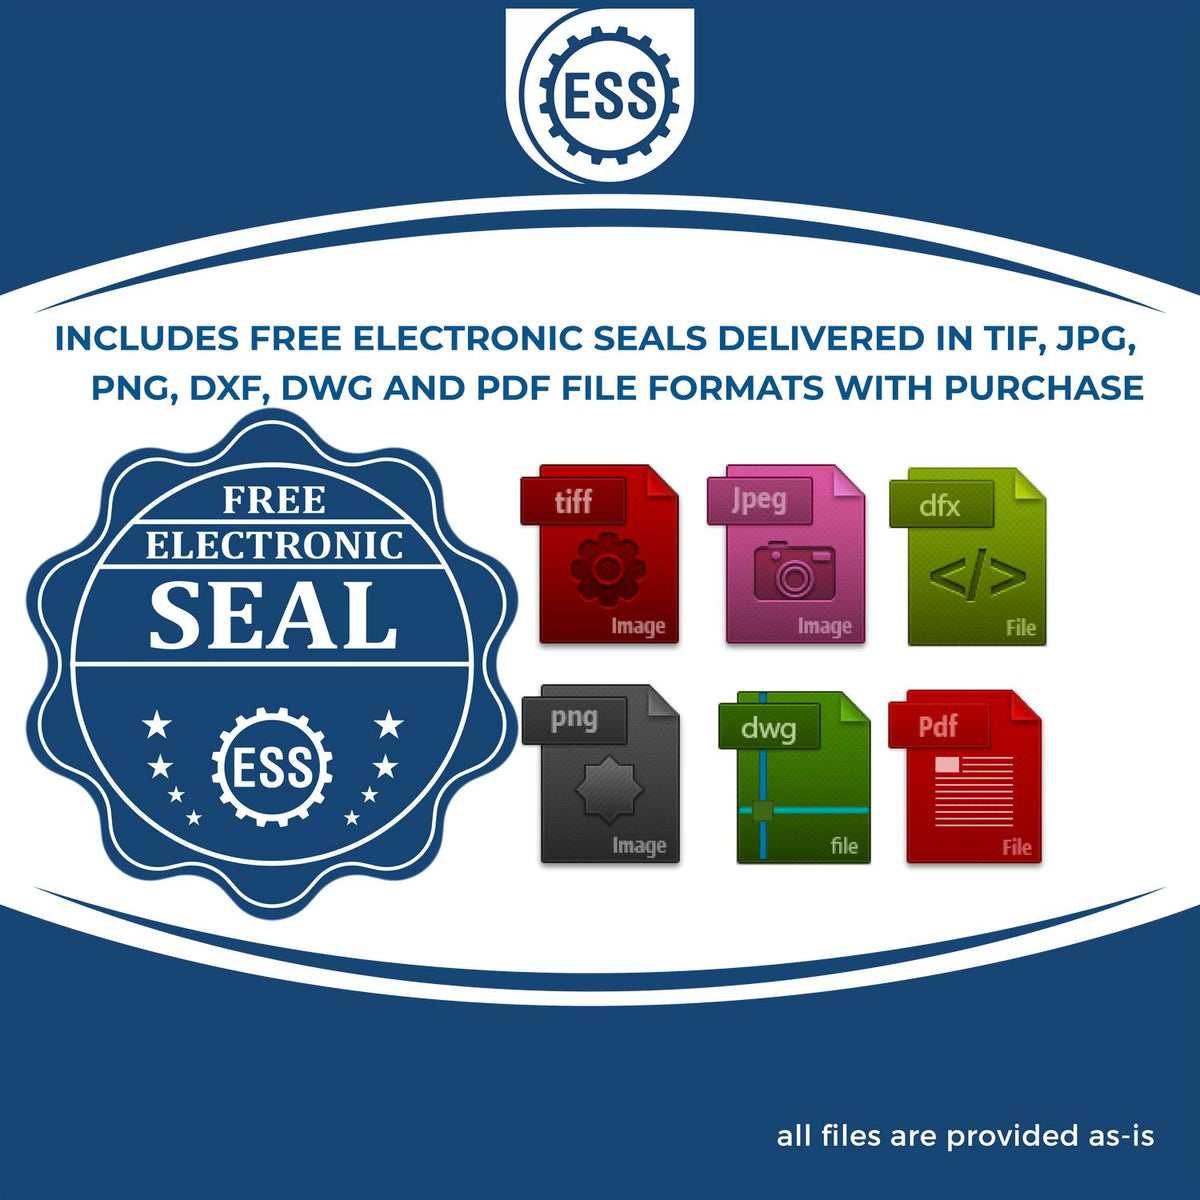 An infographic for the free electronic seal for the Self-Inking New Jersey Geologist Stamp illustrating the different file type icons such as DXF, DWG, TIF, JPG and PNG.